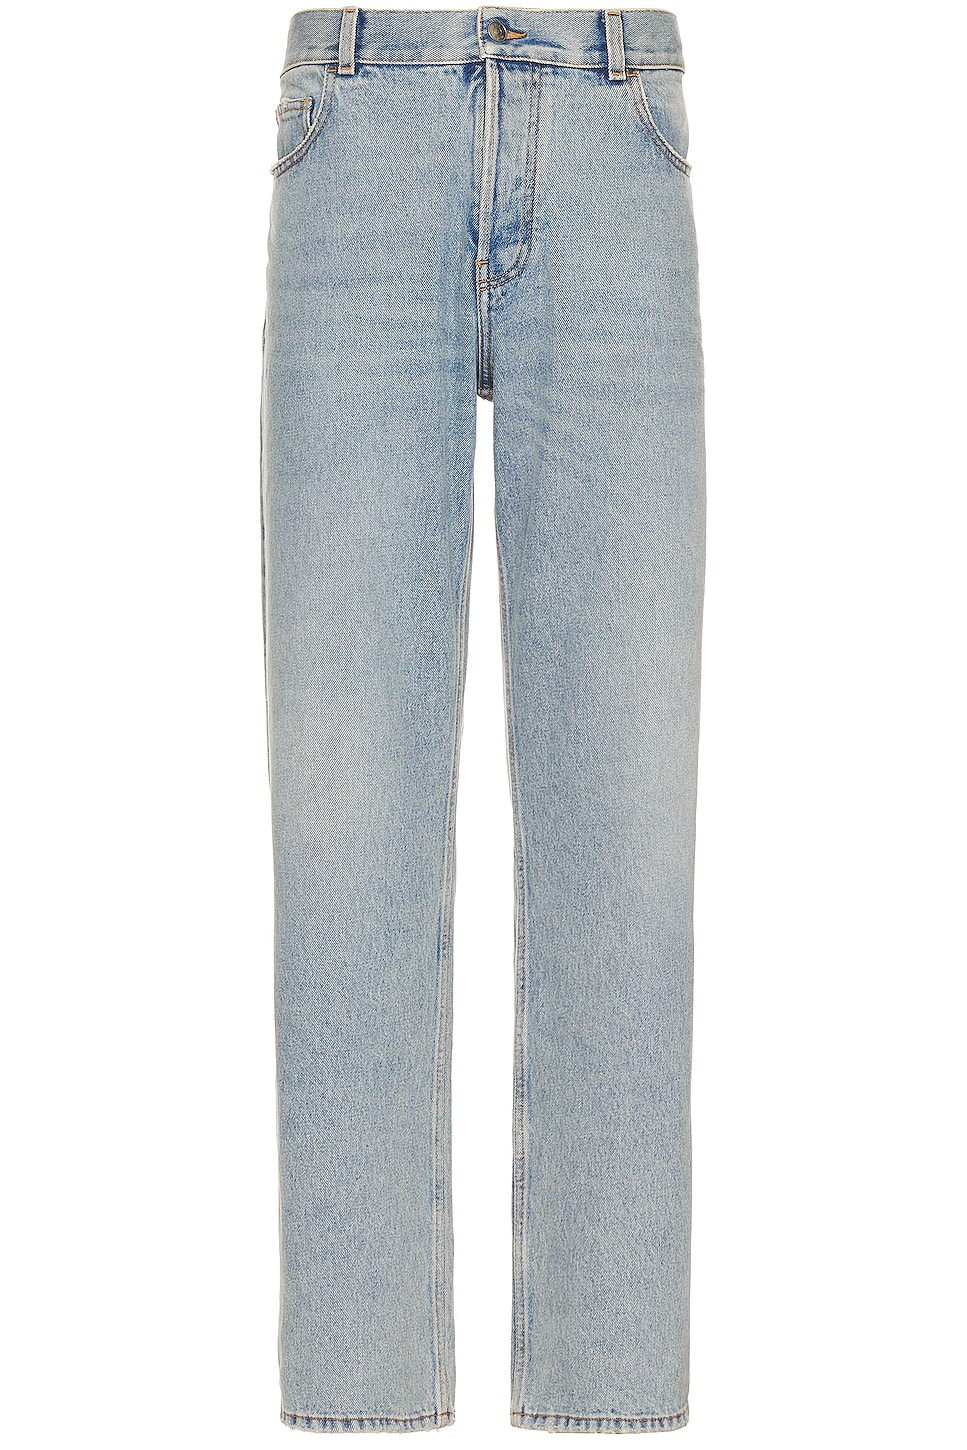 Image 1 of The Row Ross Jean in Medium Blue